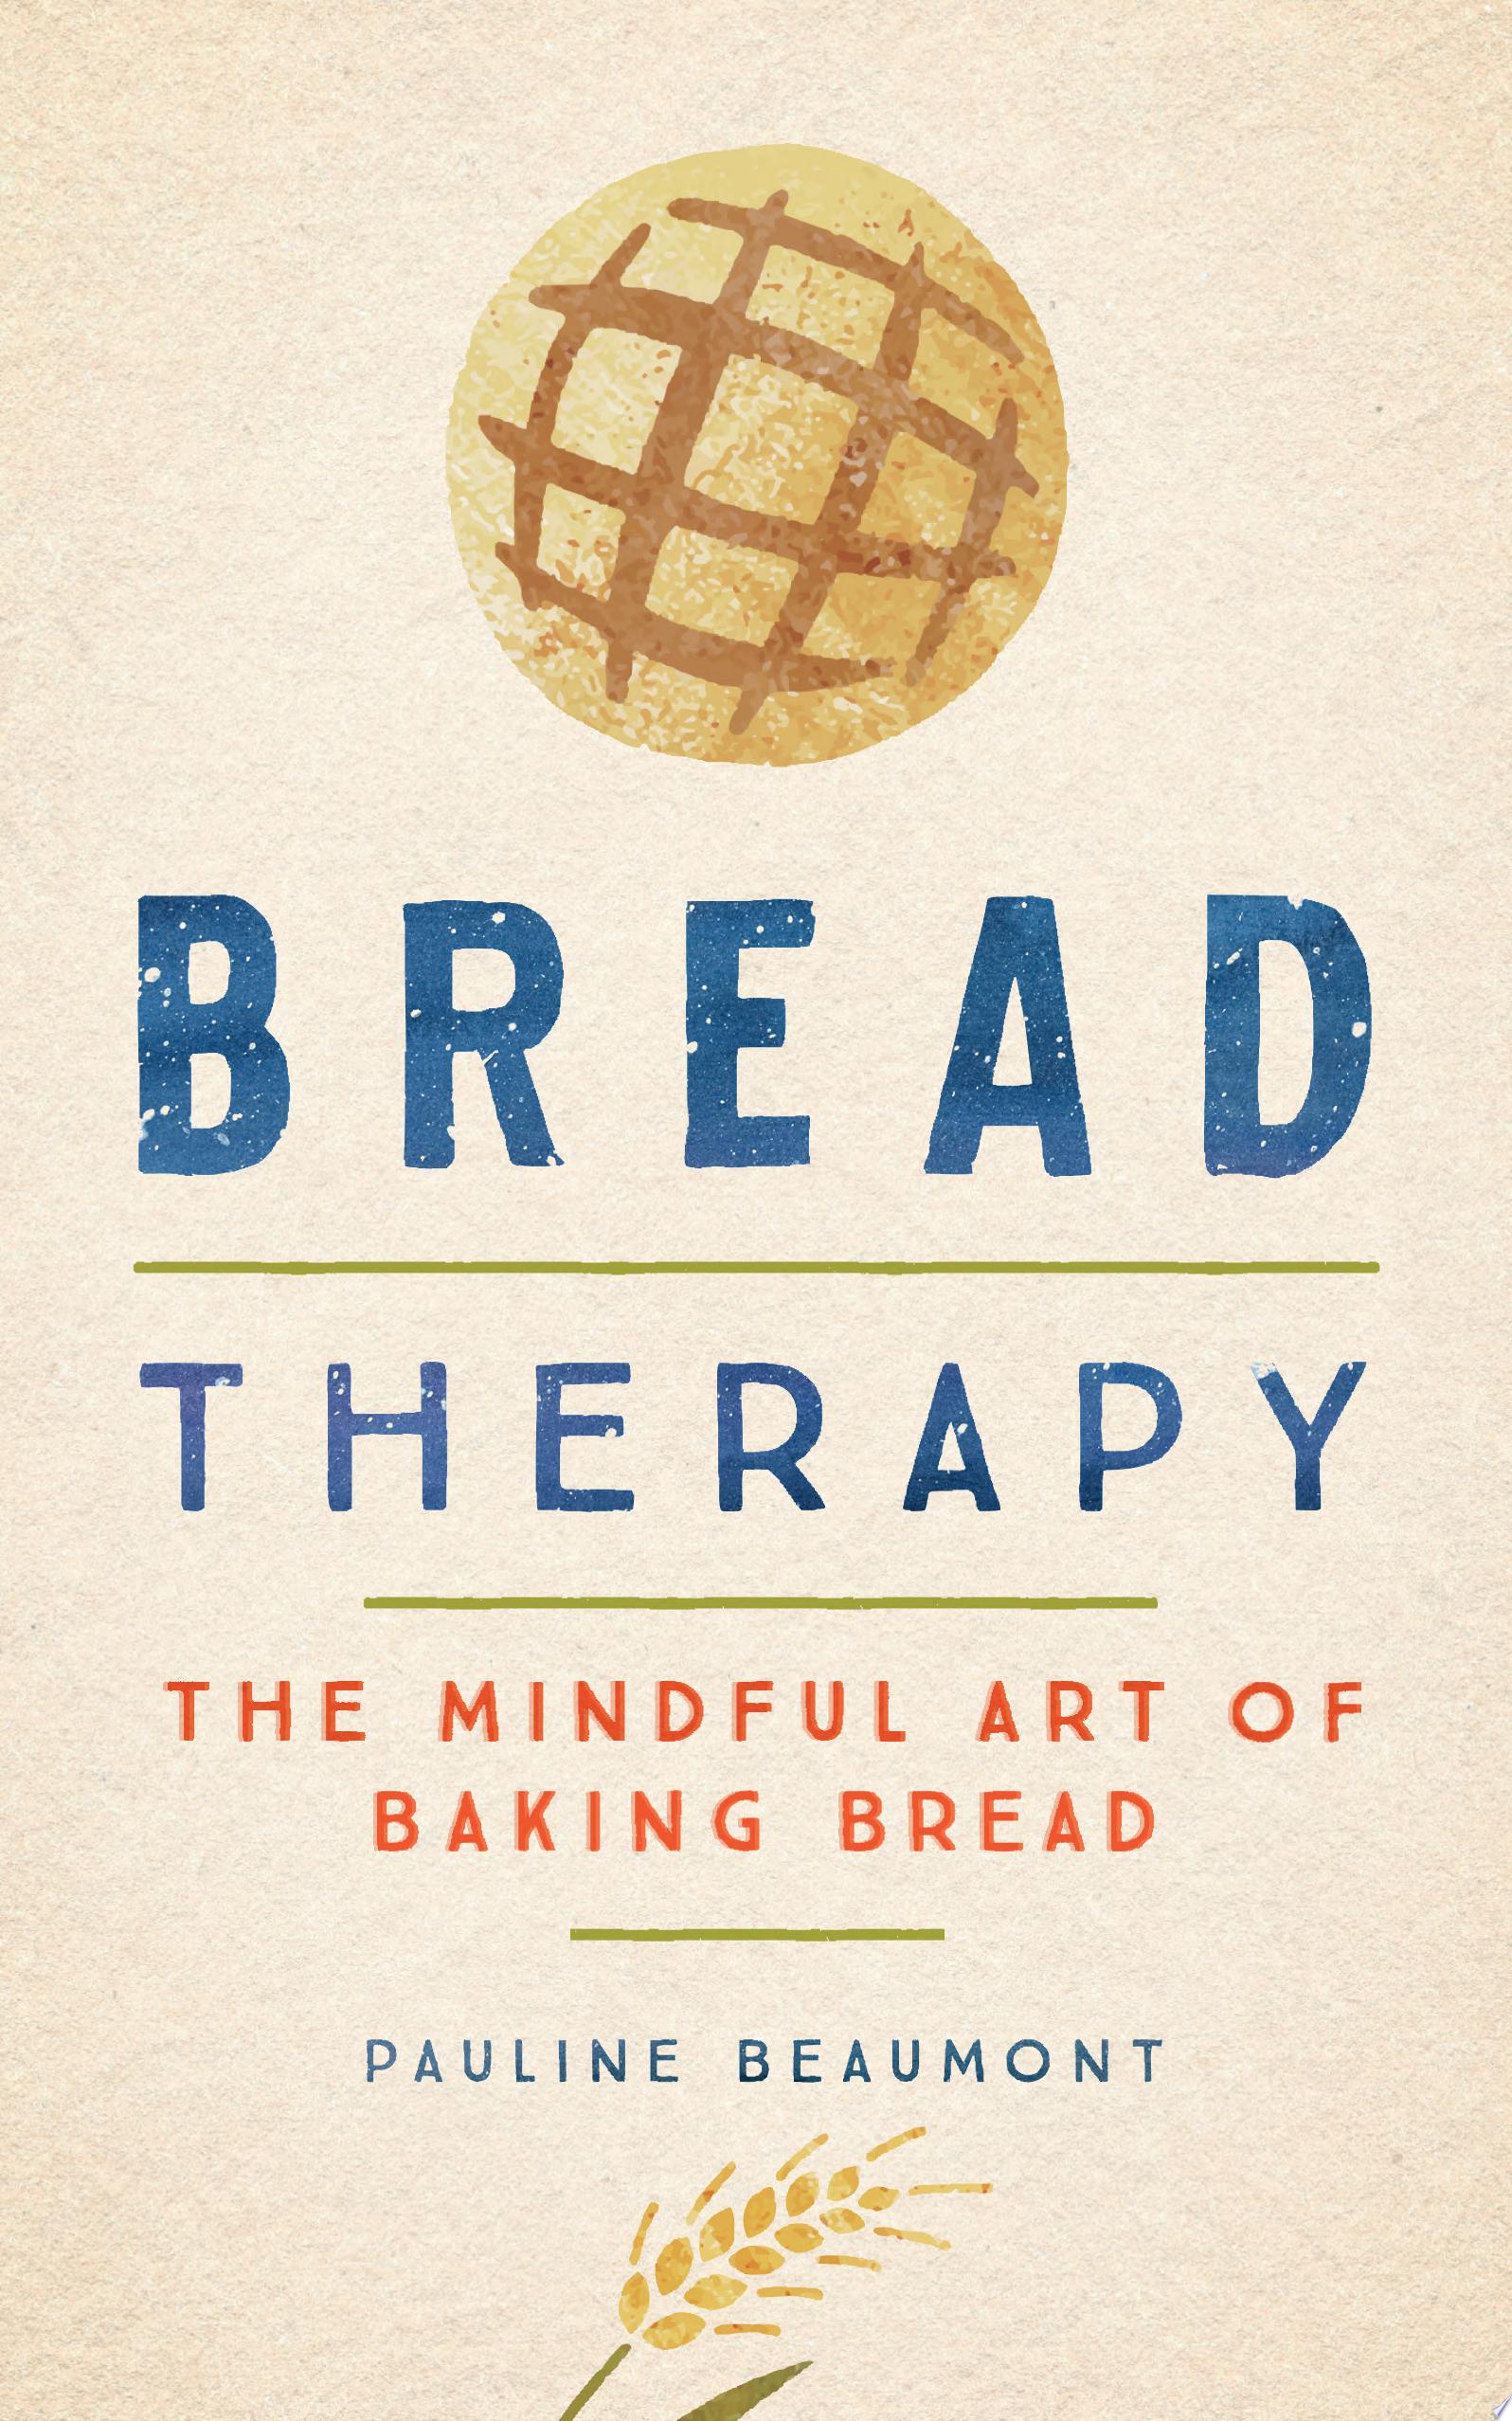 Image for "Bread Therapy"